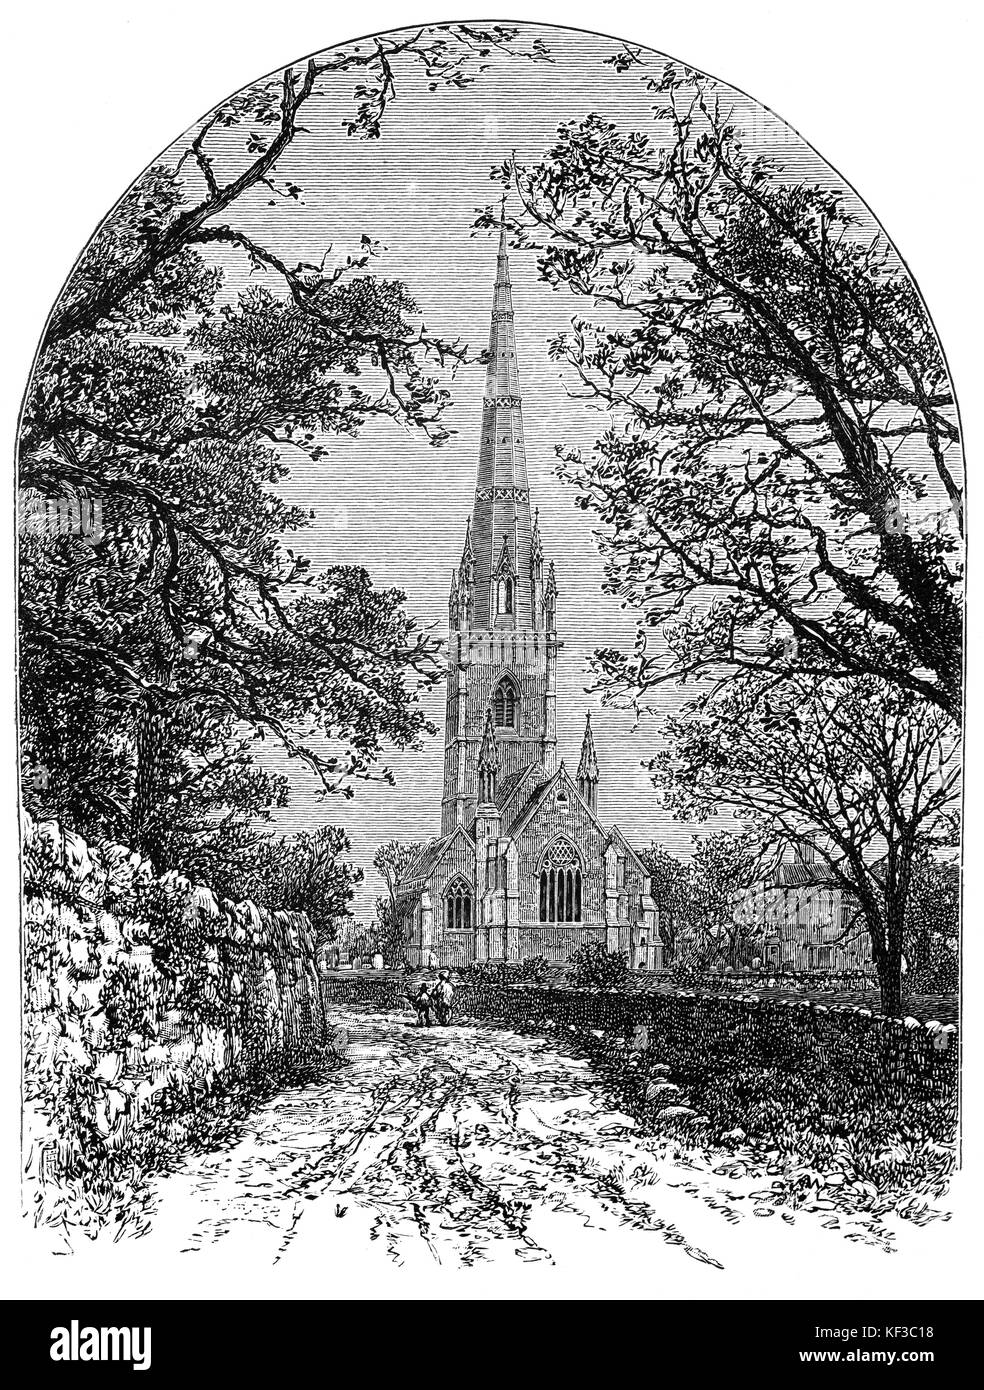 1890: 19th Century St Margaret's Church (nicknamed The Marble Church), Bodelwyddan, is a Decorated Gothic Style parish church in the lower Vale of Clwyd in Denbighshire, Wales. Its spire rises to 202 feet. Stock Photo